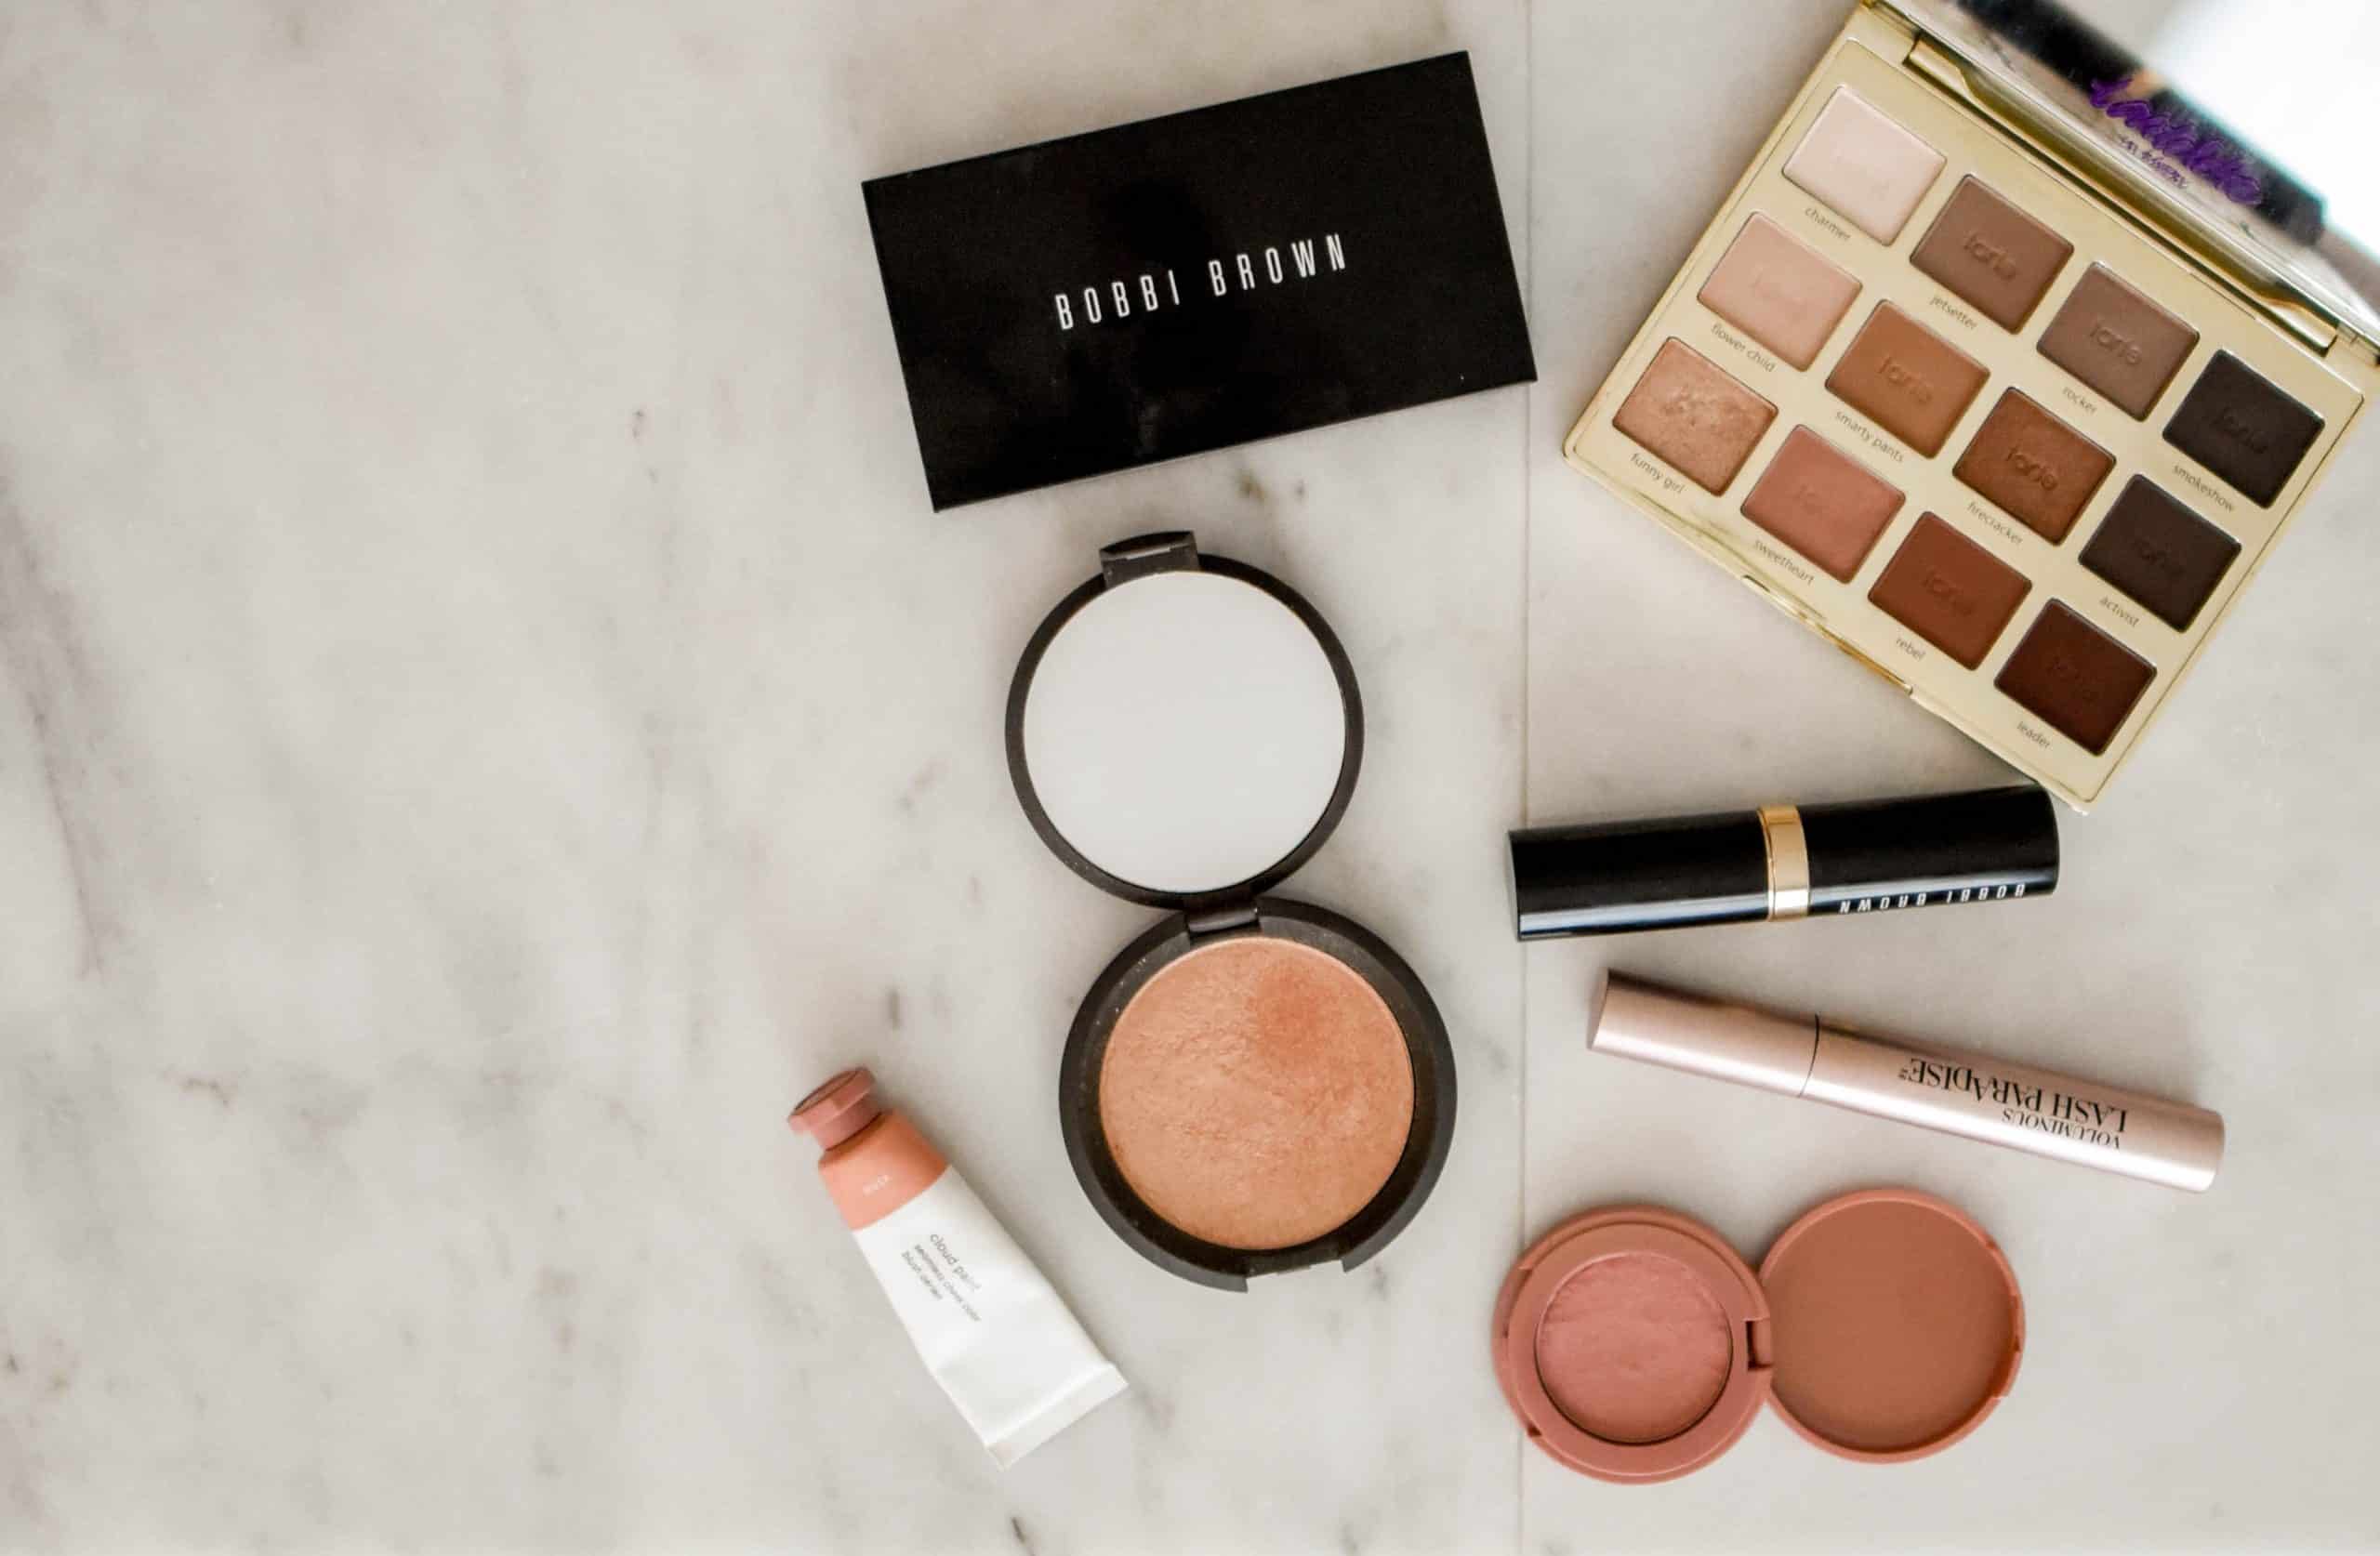 Harmful Ingredients You Didn’t Know Were In Your Cushion Foundation Compacts